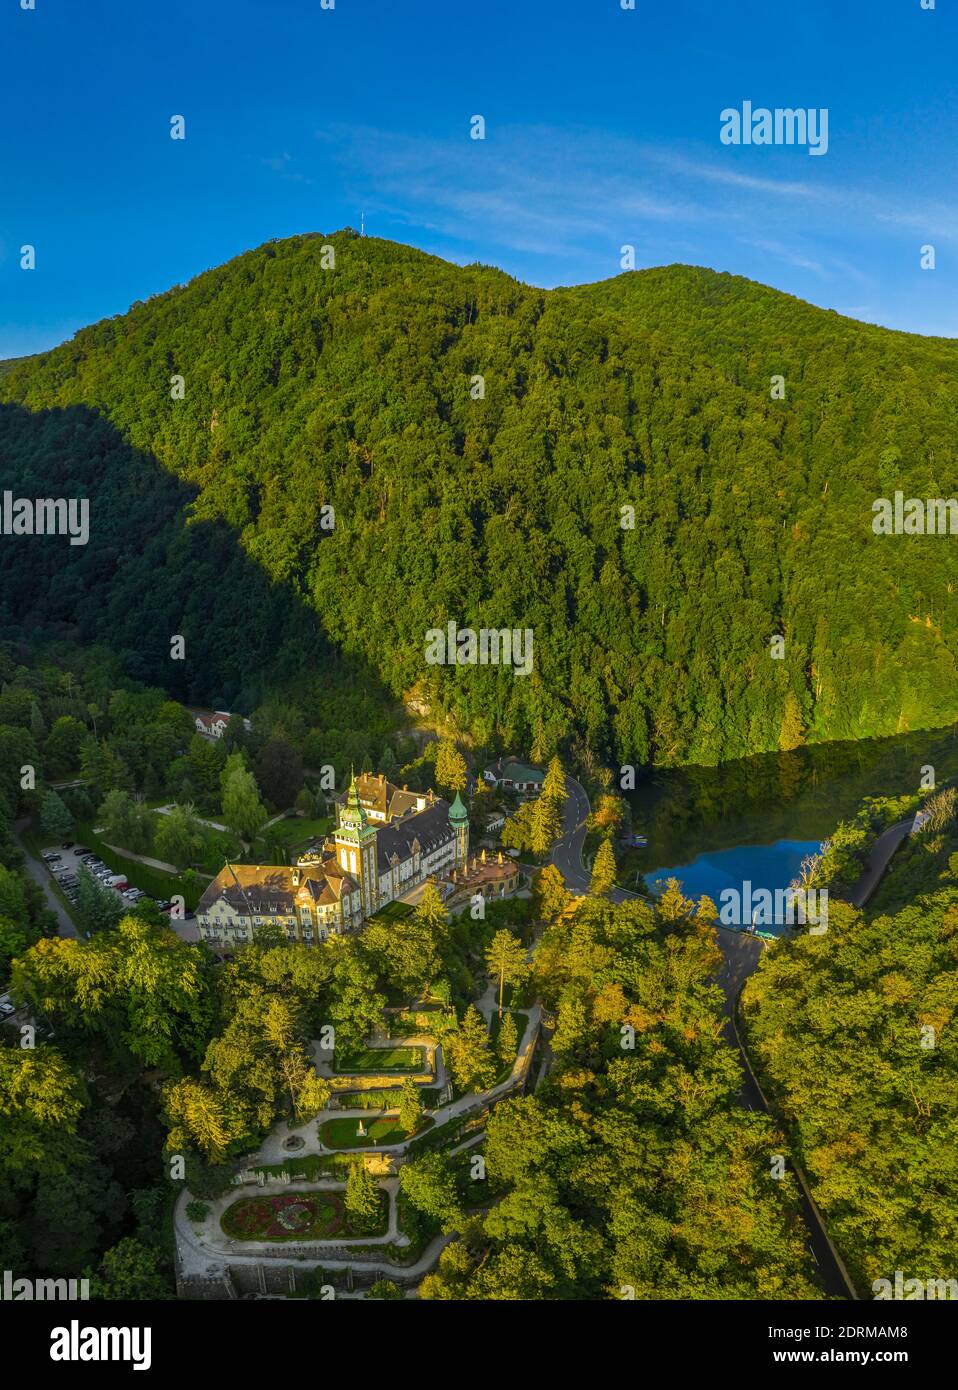 Lillafured, Hungary - Aerial view of the famous Lillafured Castle in the mountains of Bukk near Miskolc on a sunny summer morning with clear blue sky Stock Photo